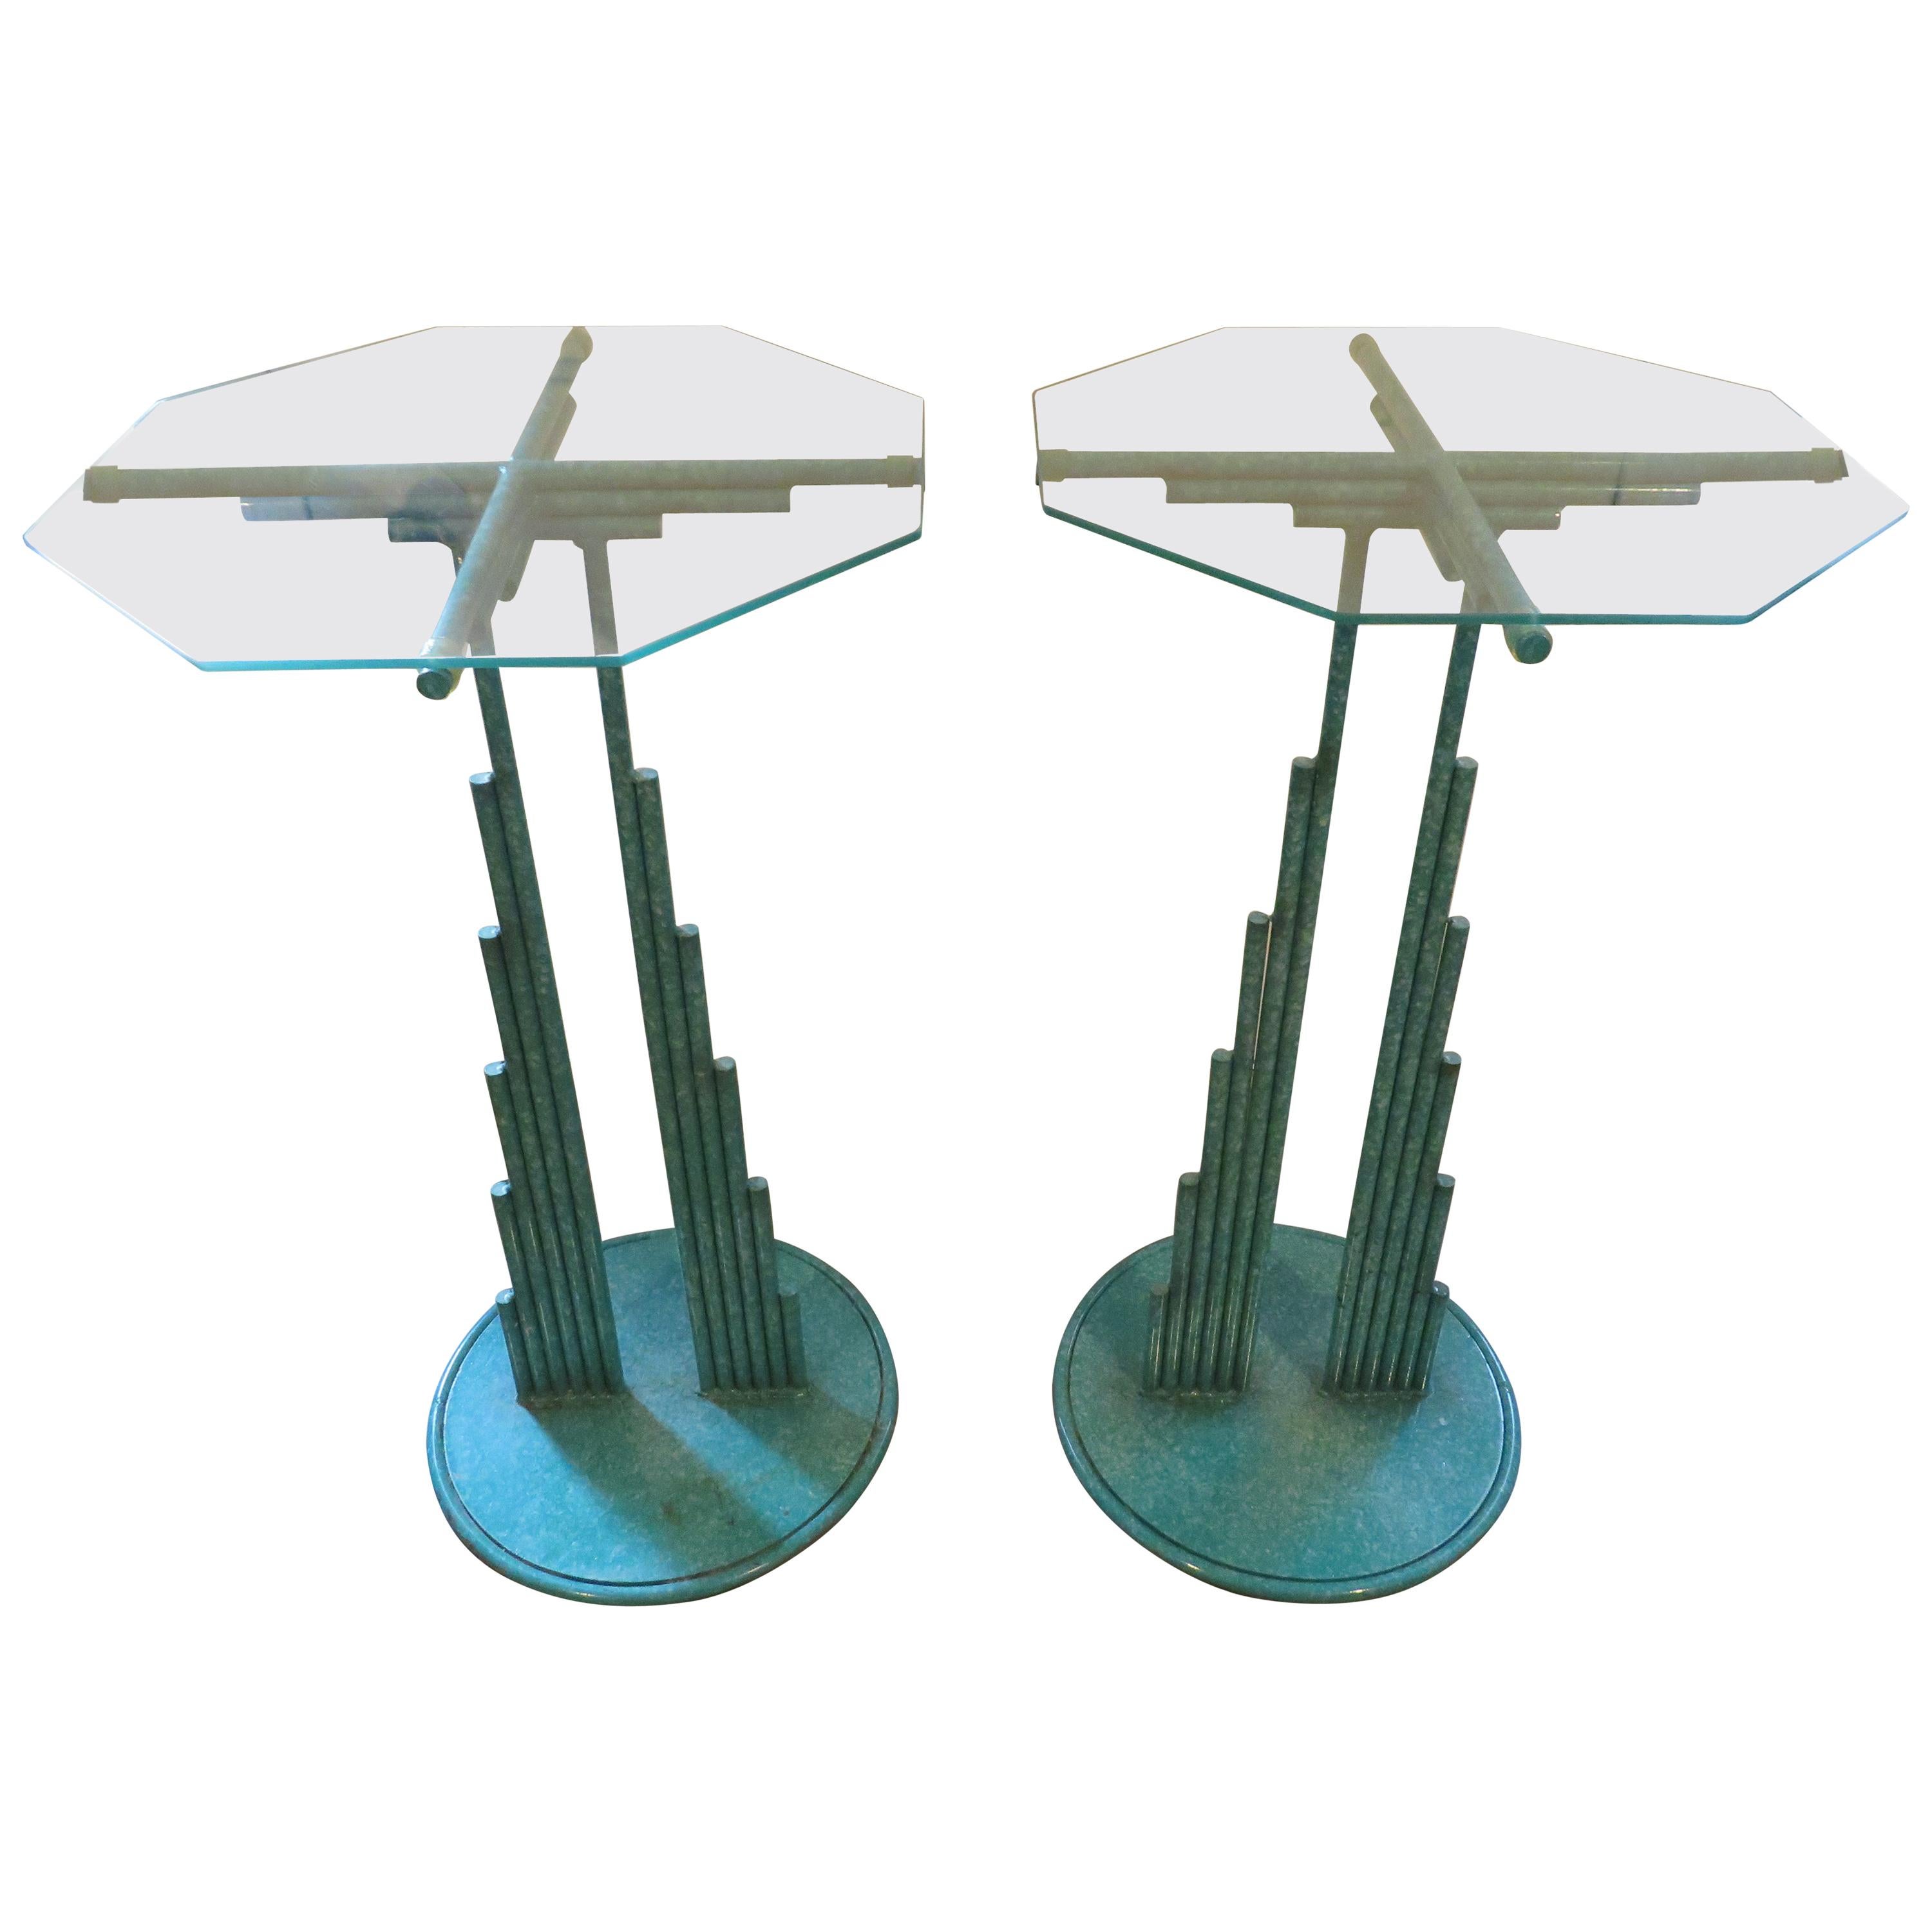 Rare Pair of Curtis Jere Memphis Style Side Tables Pedestals, Mid-Century Modern